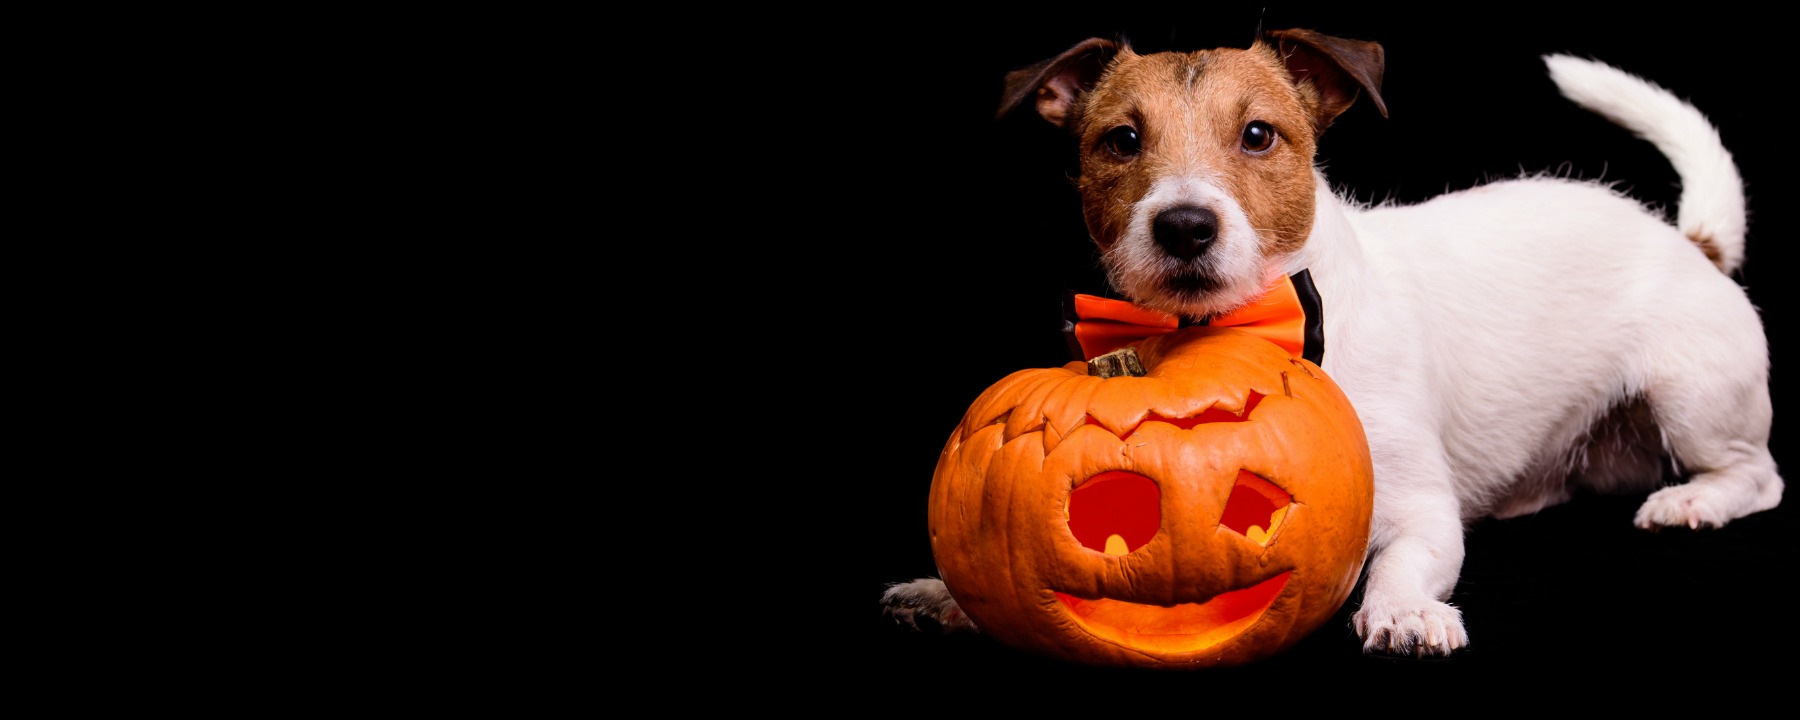 A Complete Guide to Halloween Safety for Pets